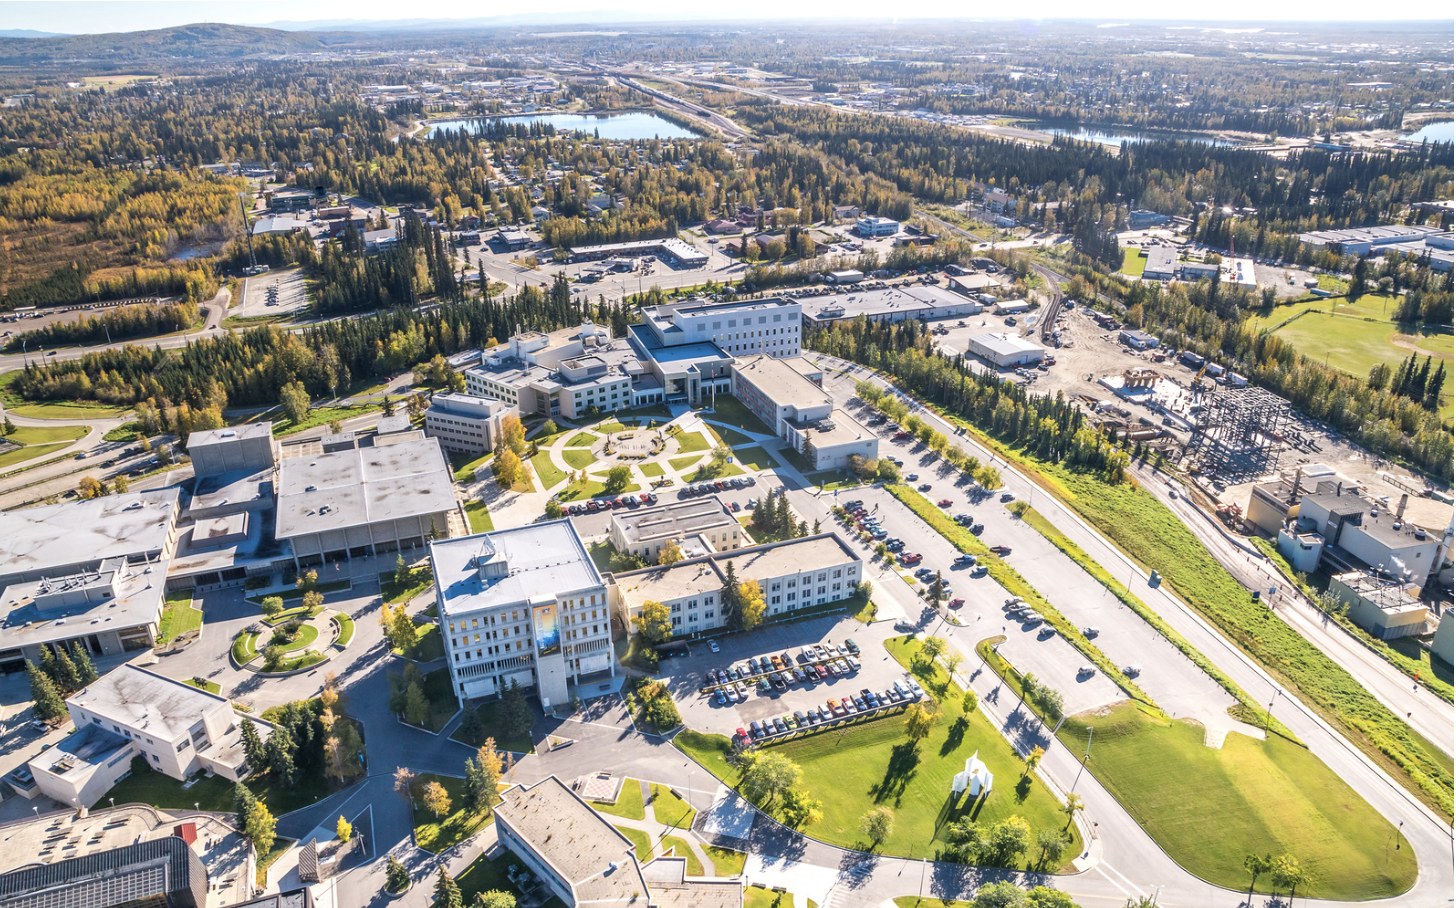 Photo of the campus of the University of the Alaska Fairbanks